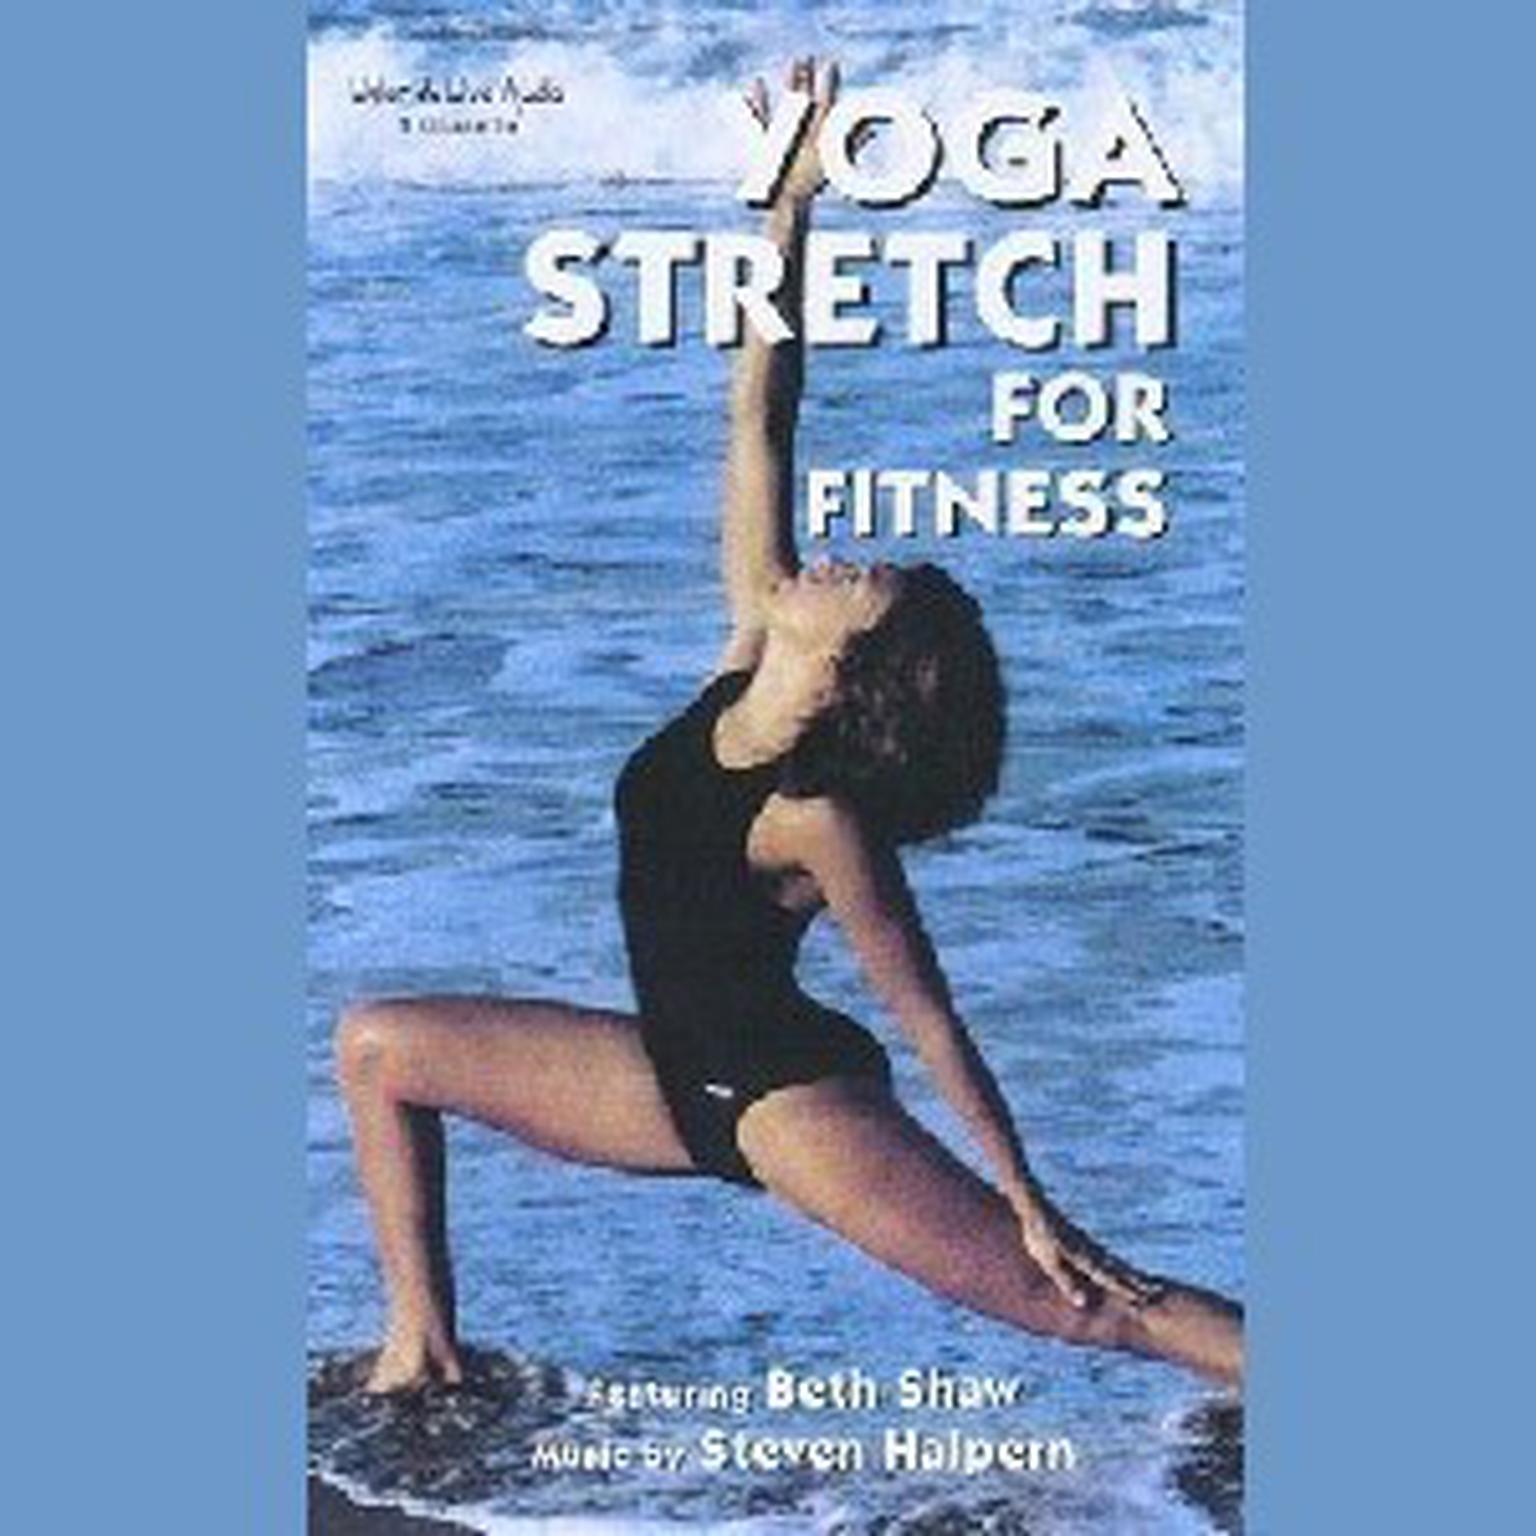 Yoga Stretch For Fitness Audiobook, by Beth Shaw